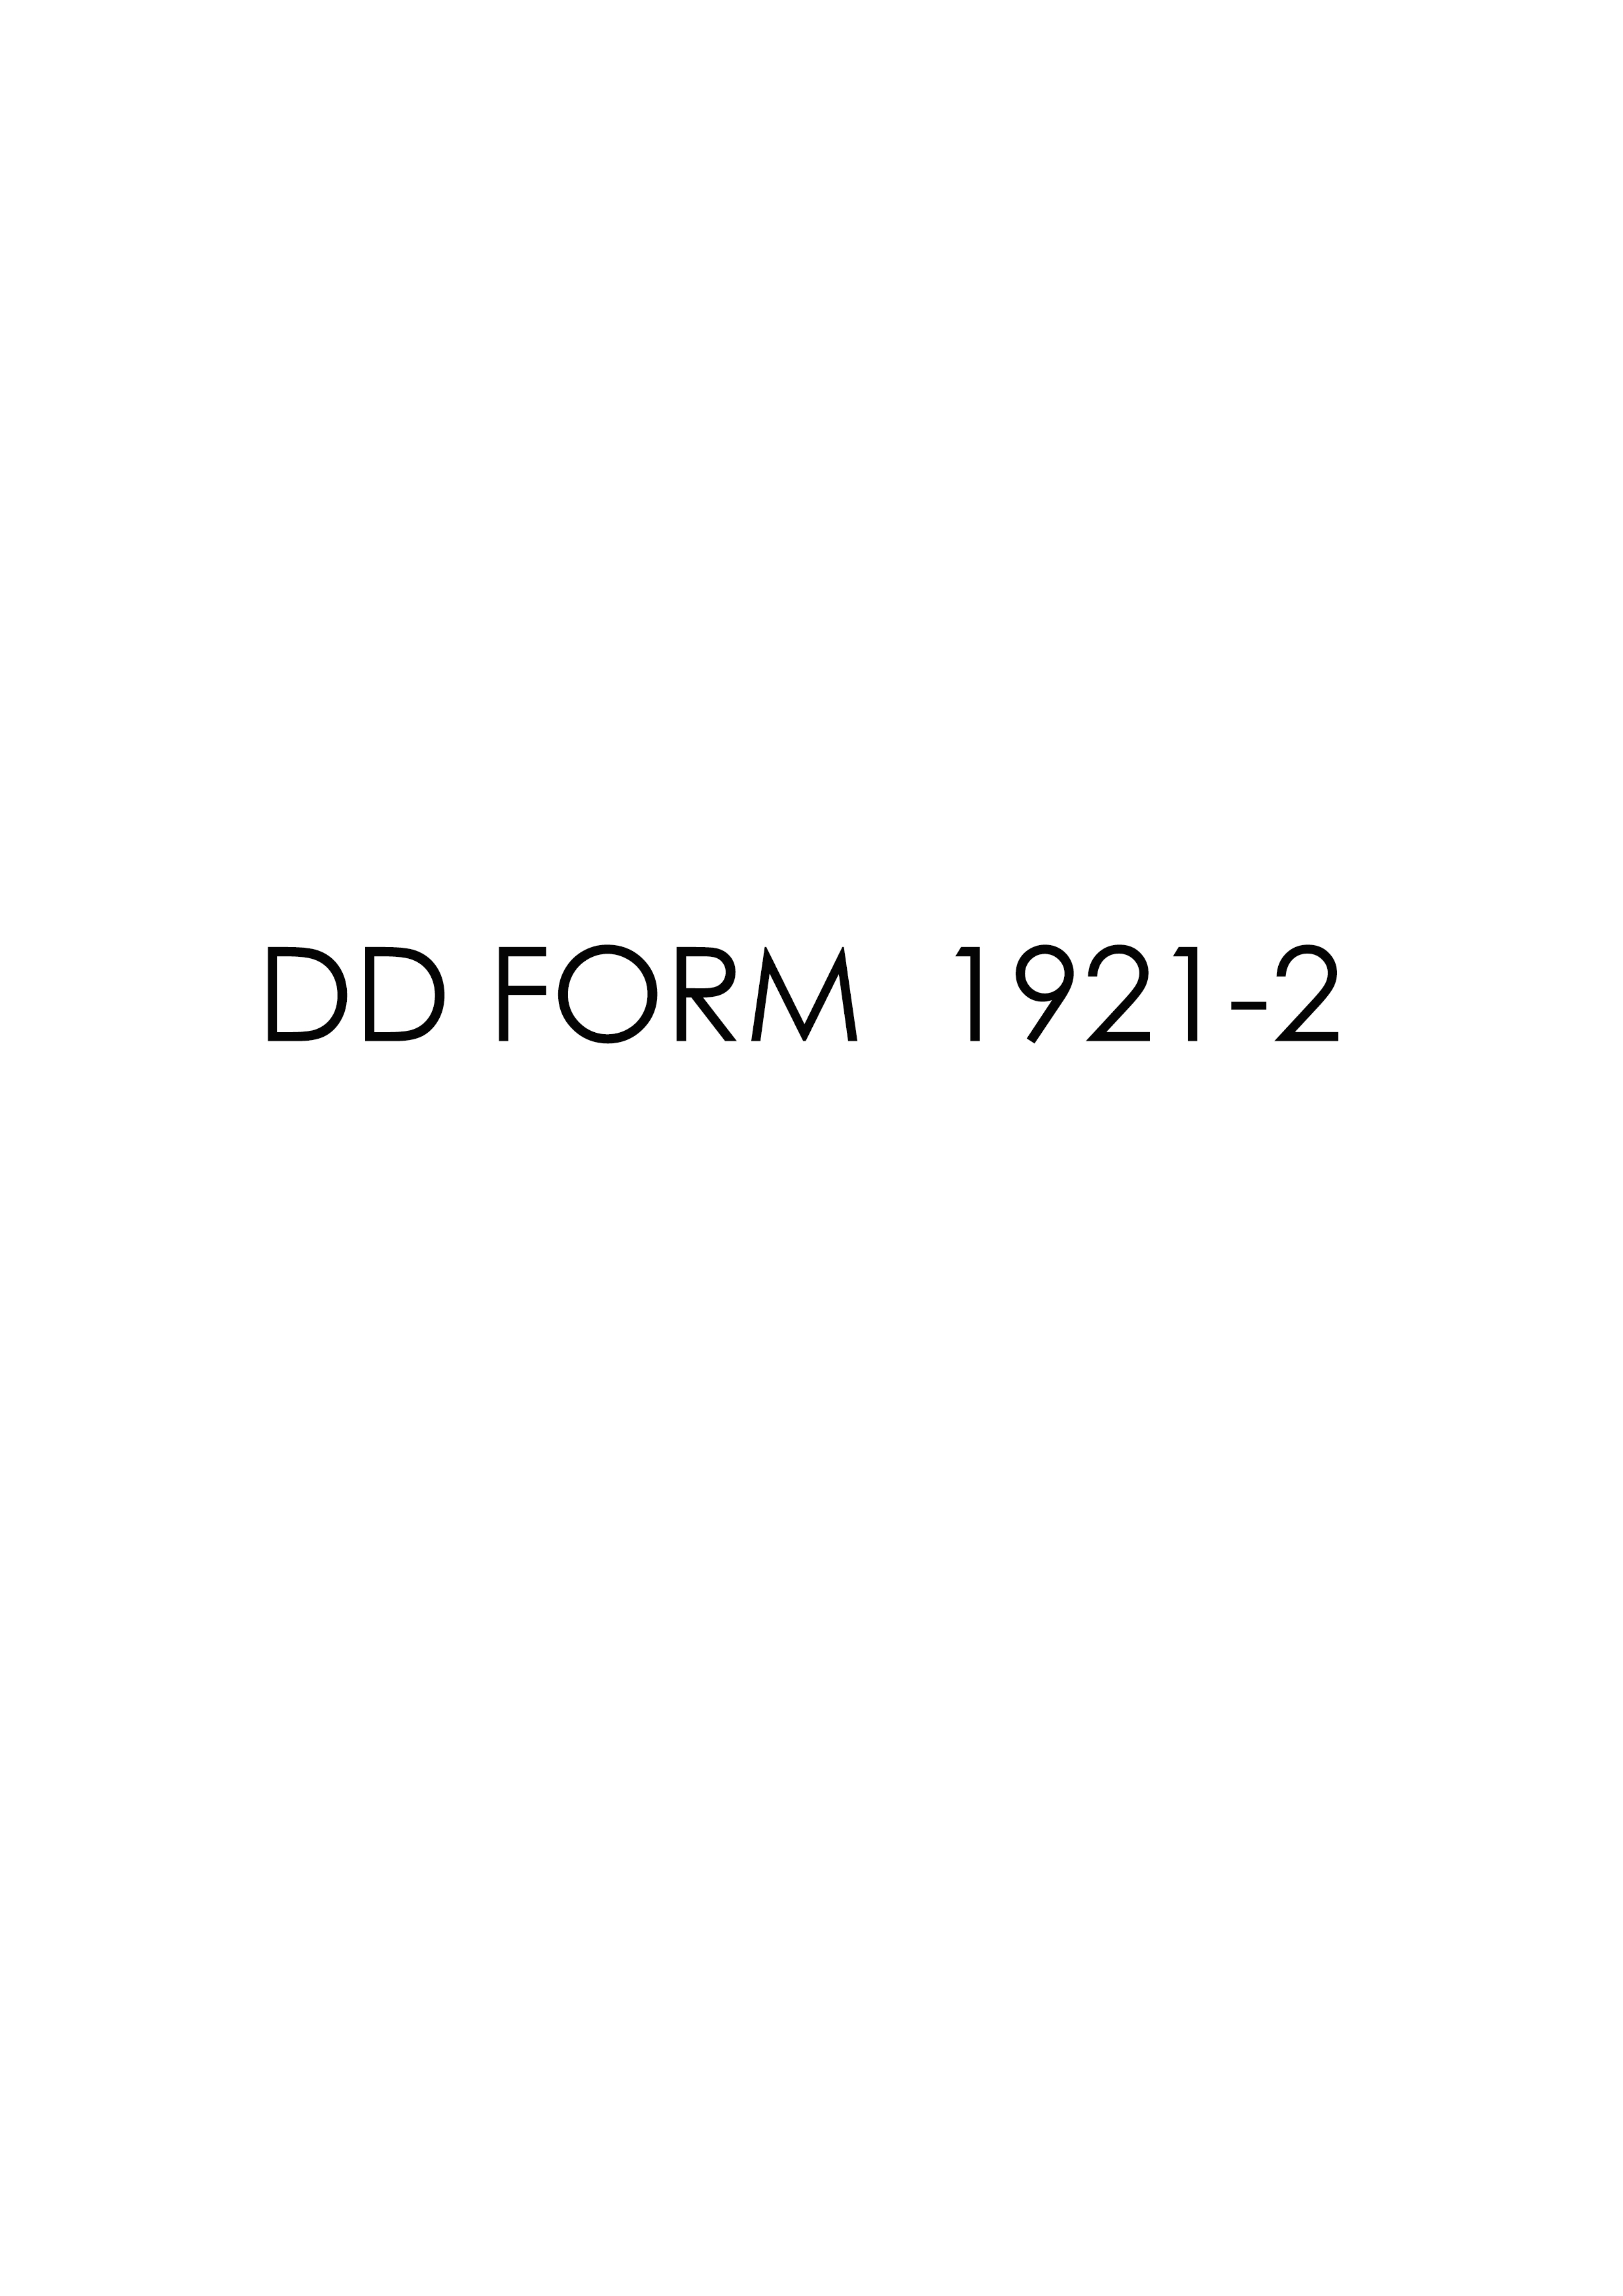 Download Fillable dd Form 1921-2